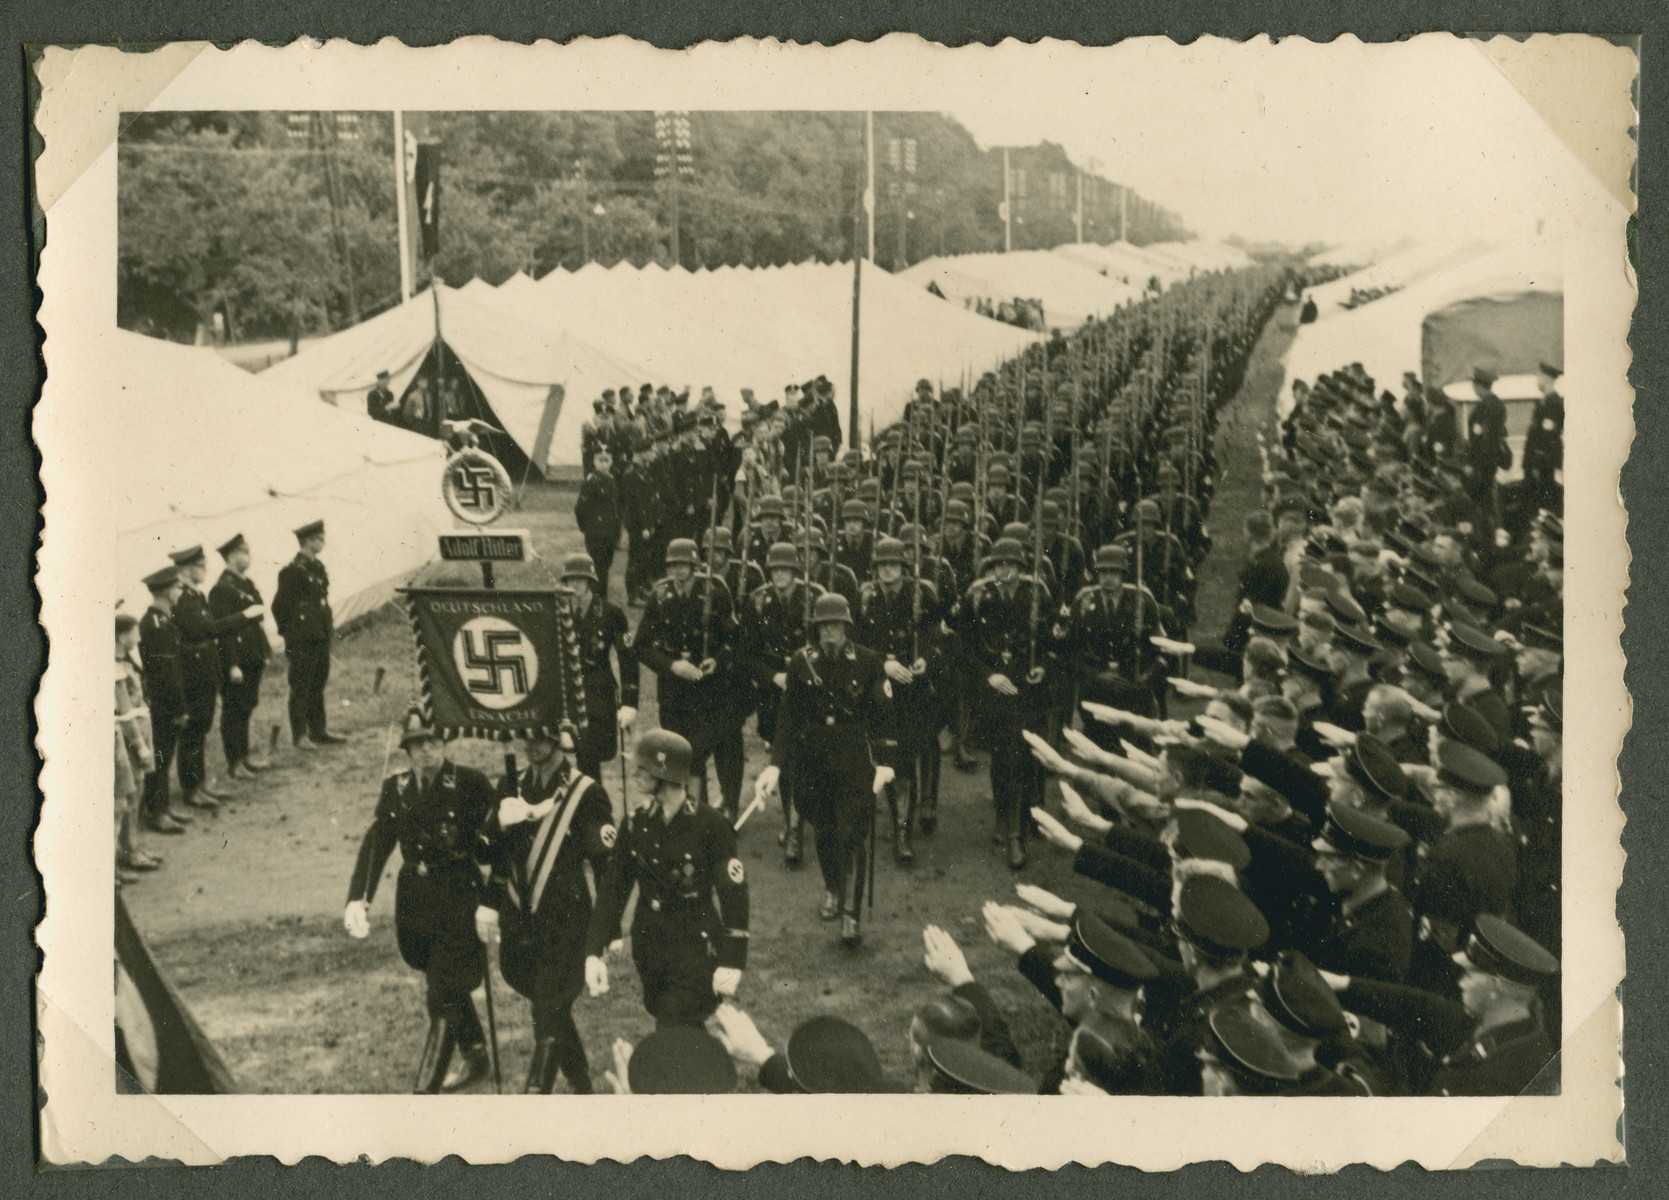 SS troops march past a slauting crowd during the Reichsparteitag in Weimar.